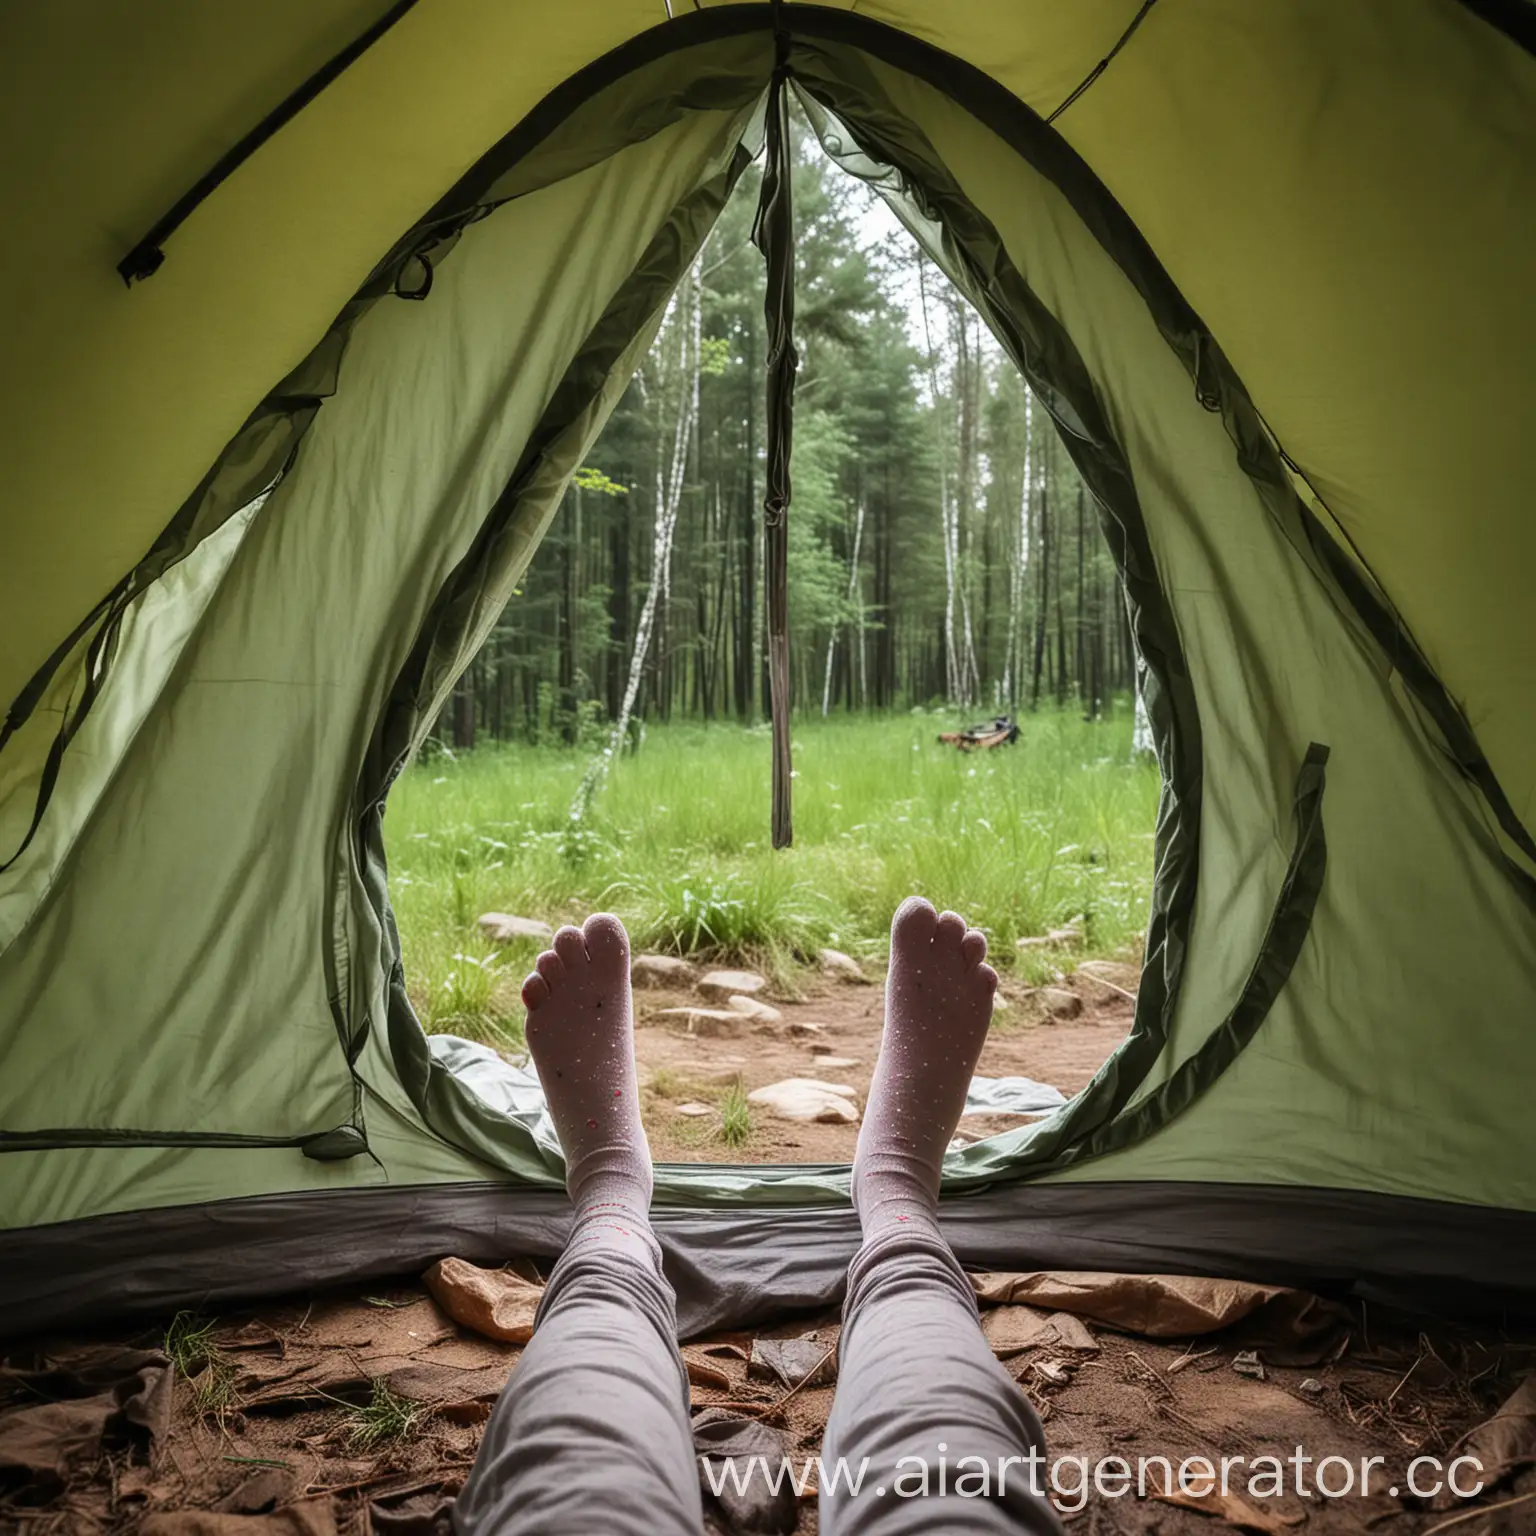 Girl's feet in socks inside a tent. The door is open. Outside the tent green forest